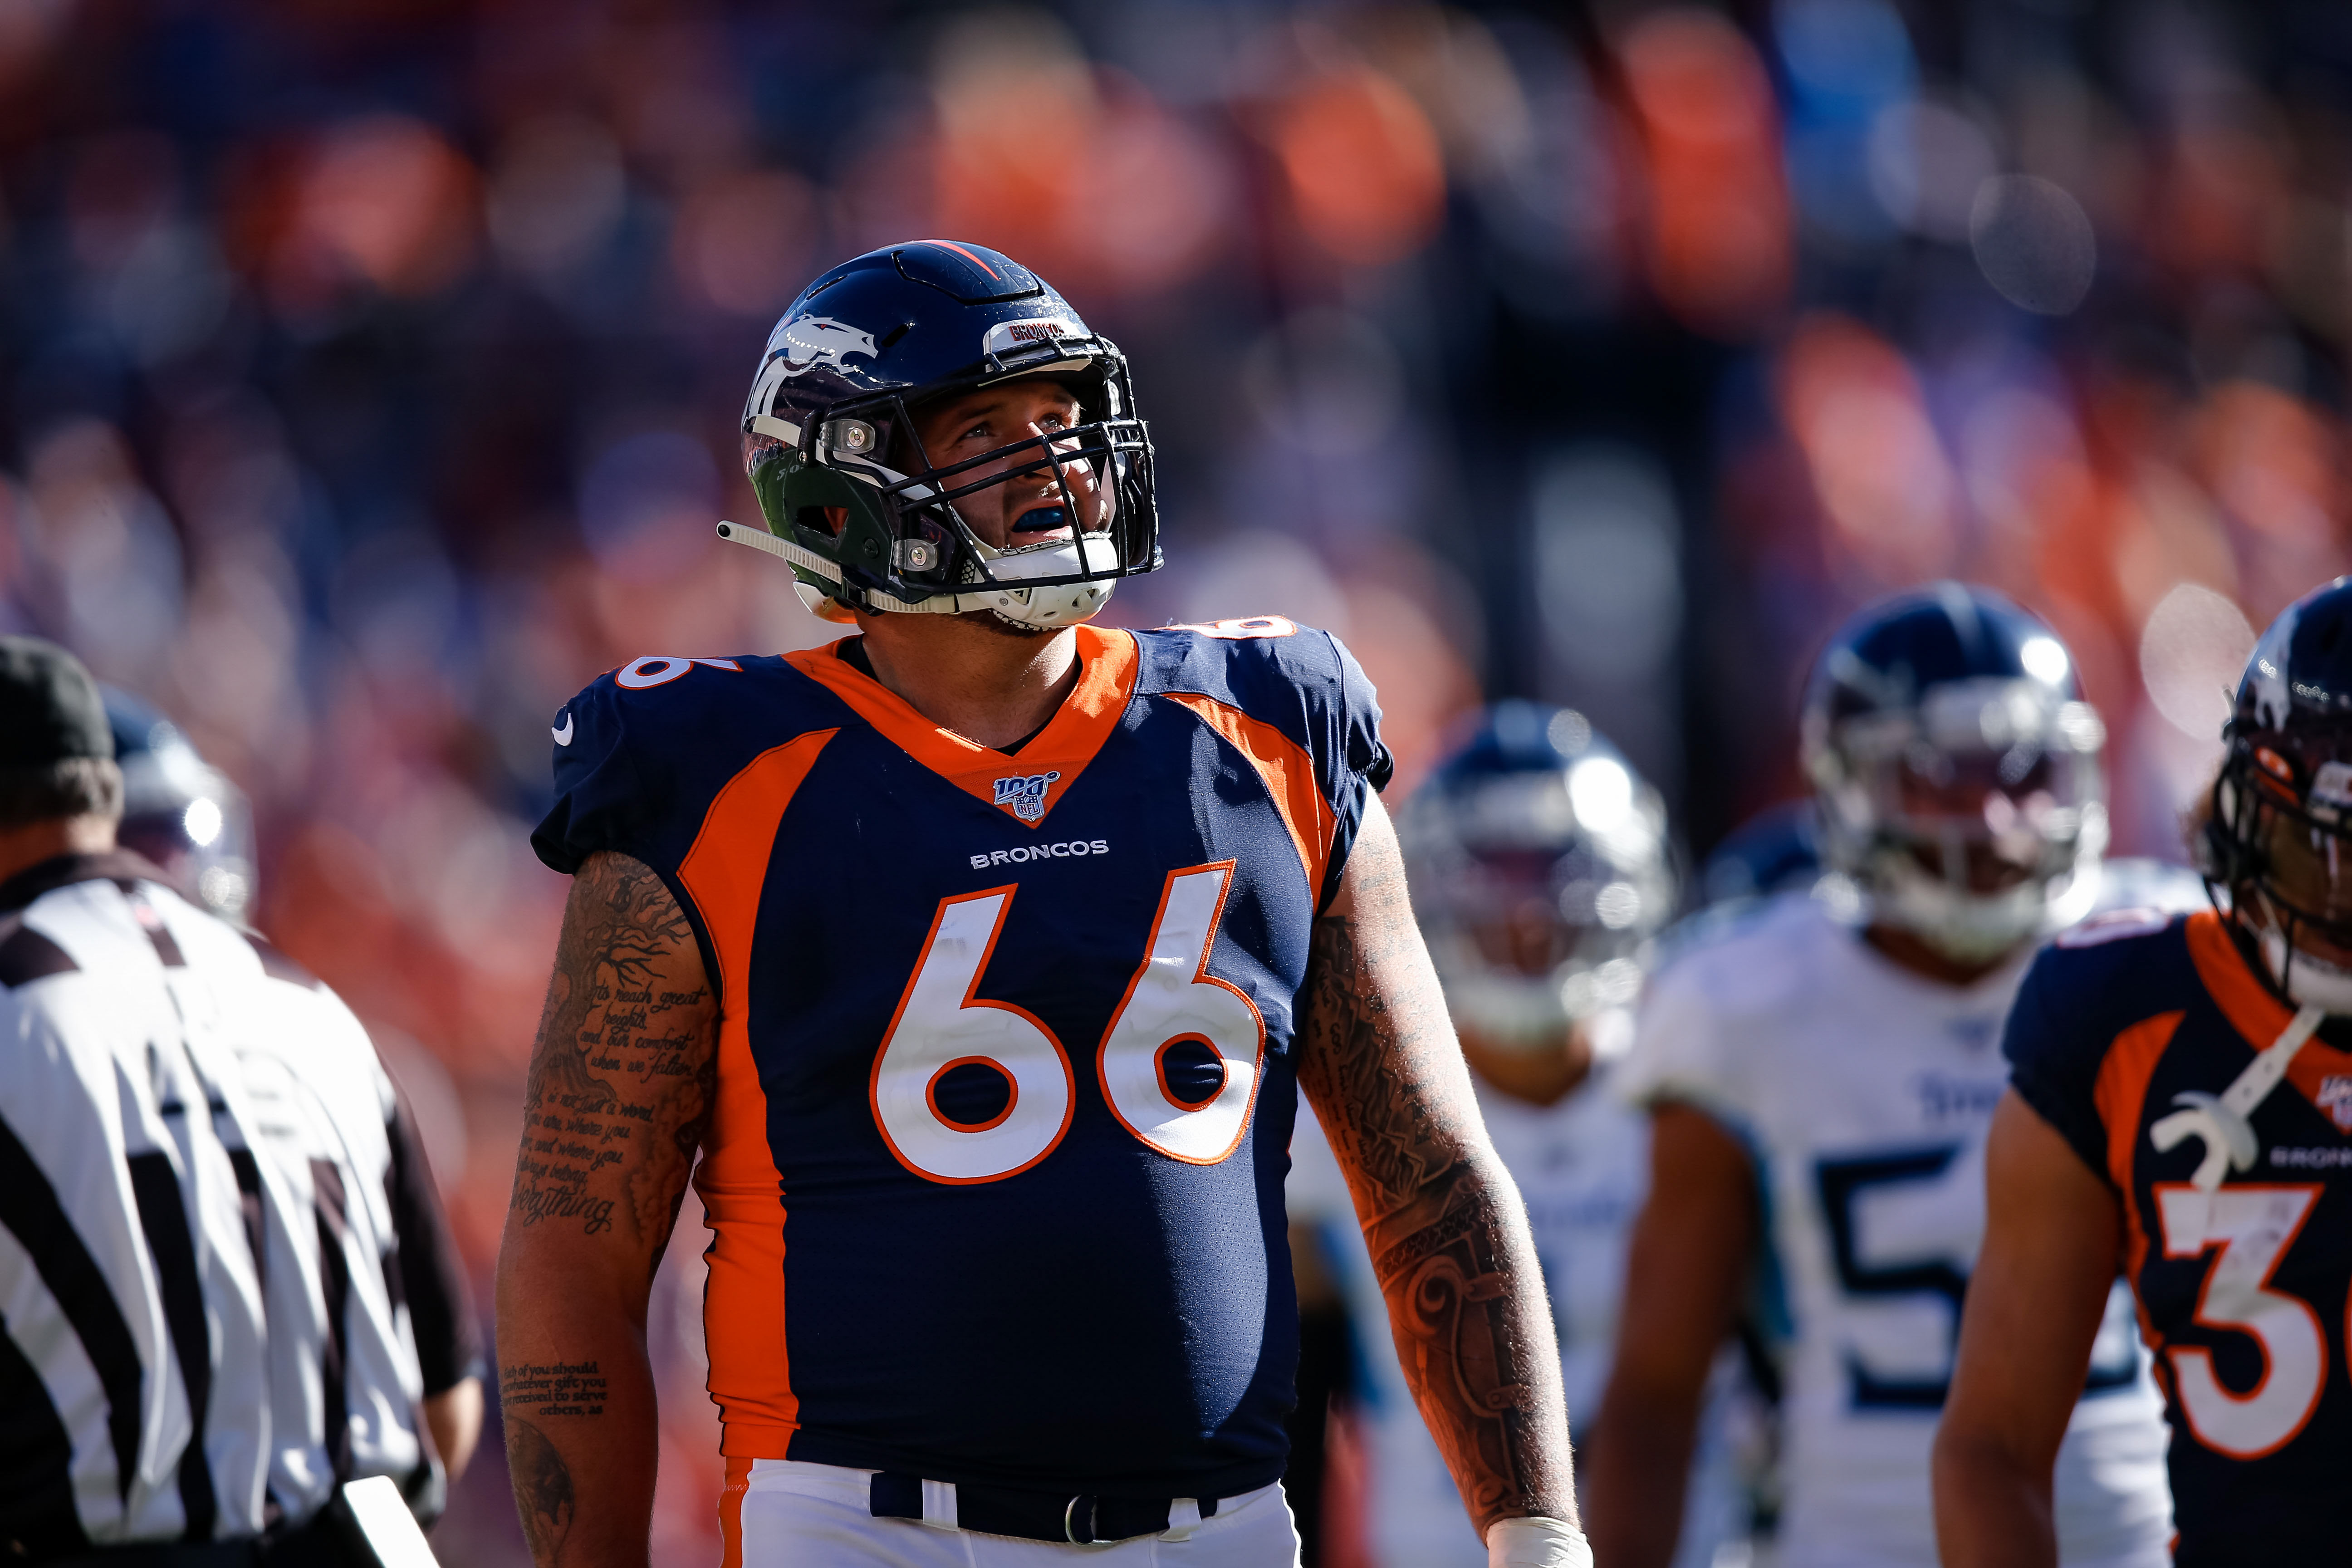 Denver Broncos guard Dalton Risner (66) in the second quarter against the Tennessee Titans at Empower Field at Mile High.